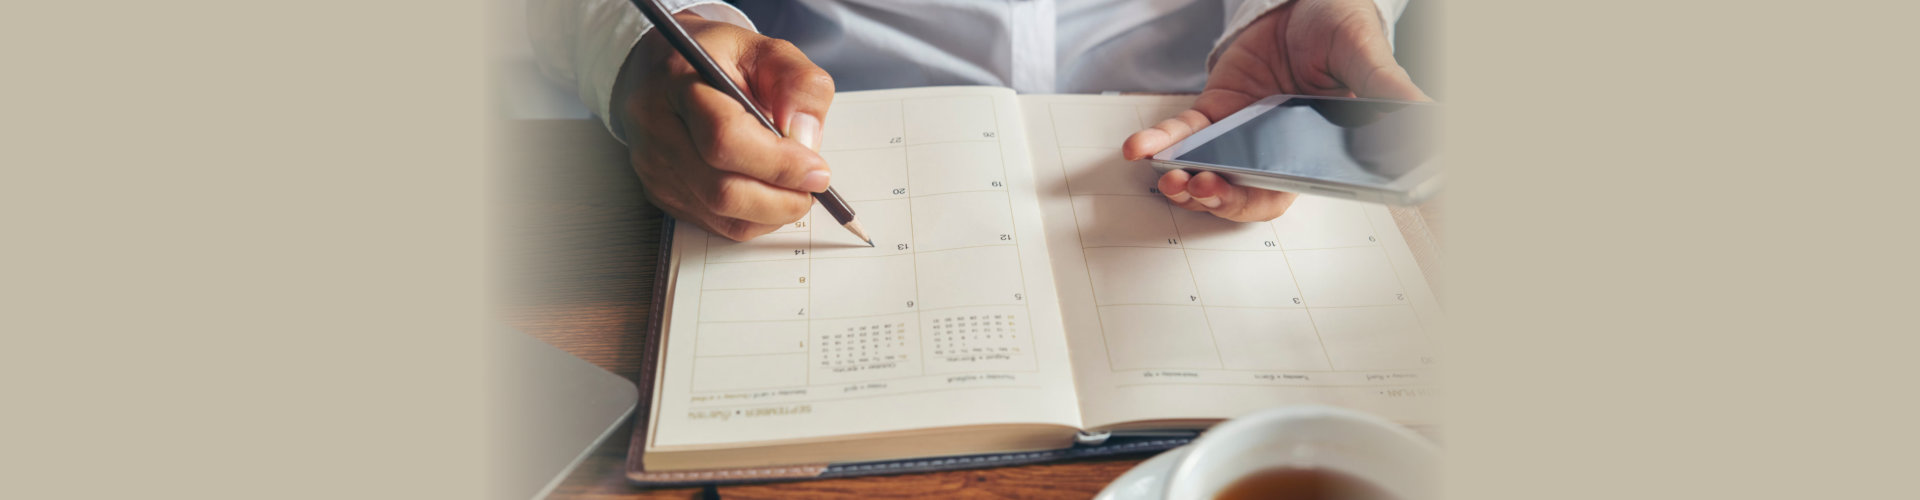 Planner plan Schedule Calendar and reminder agenda, work online at home. Women hand planning daily appointment and note holiday trip in diary at office desk. Calendar reminder event concept.